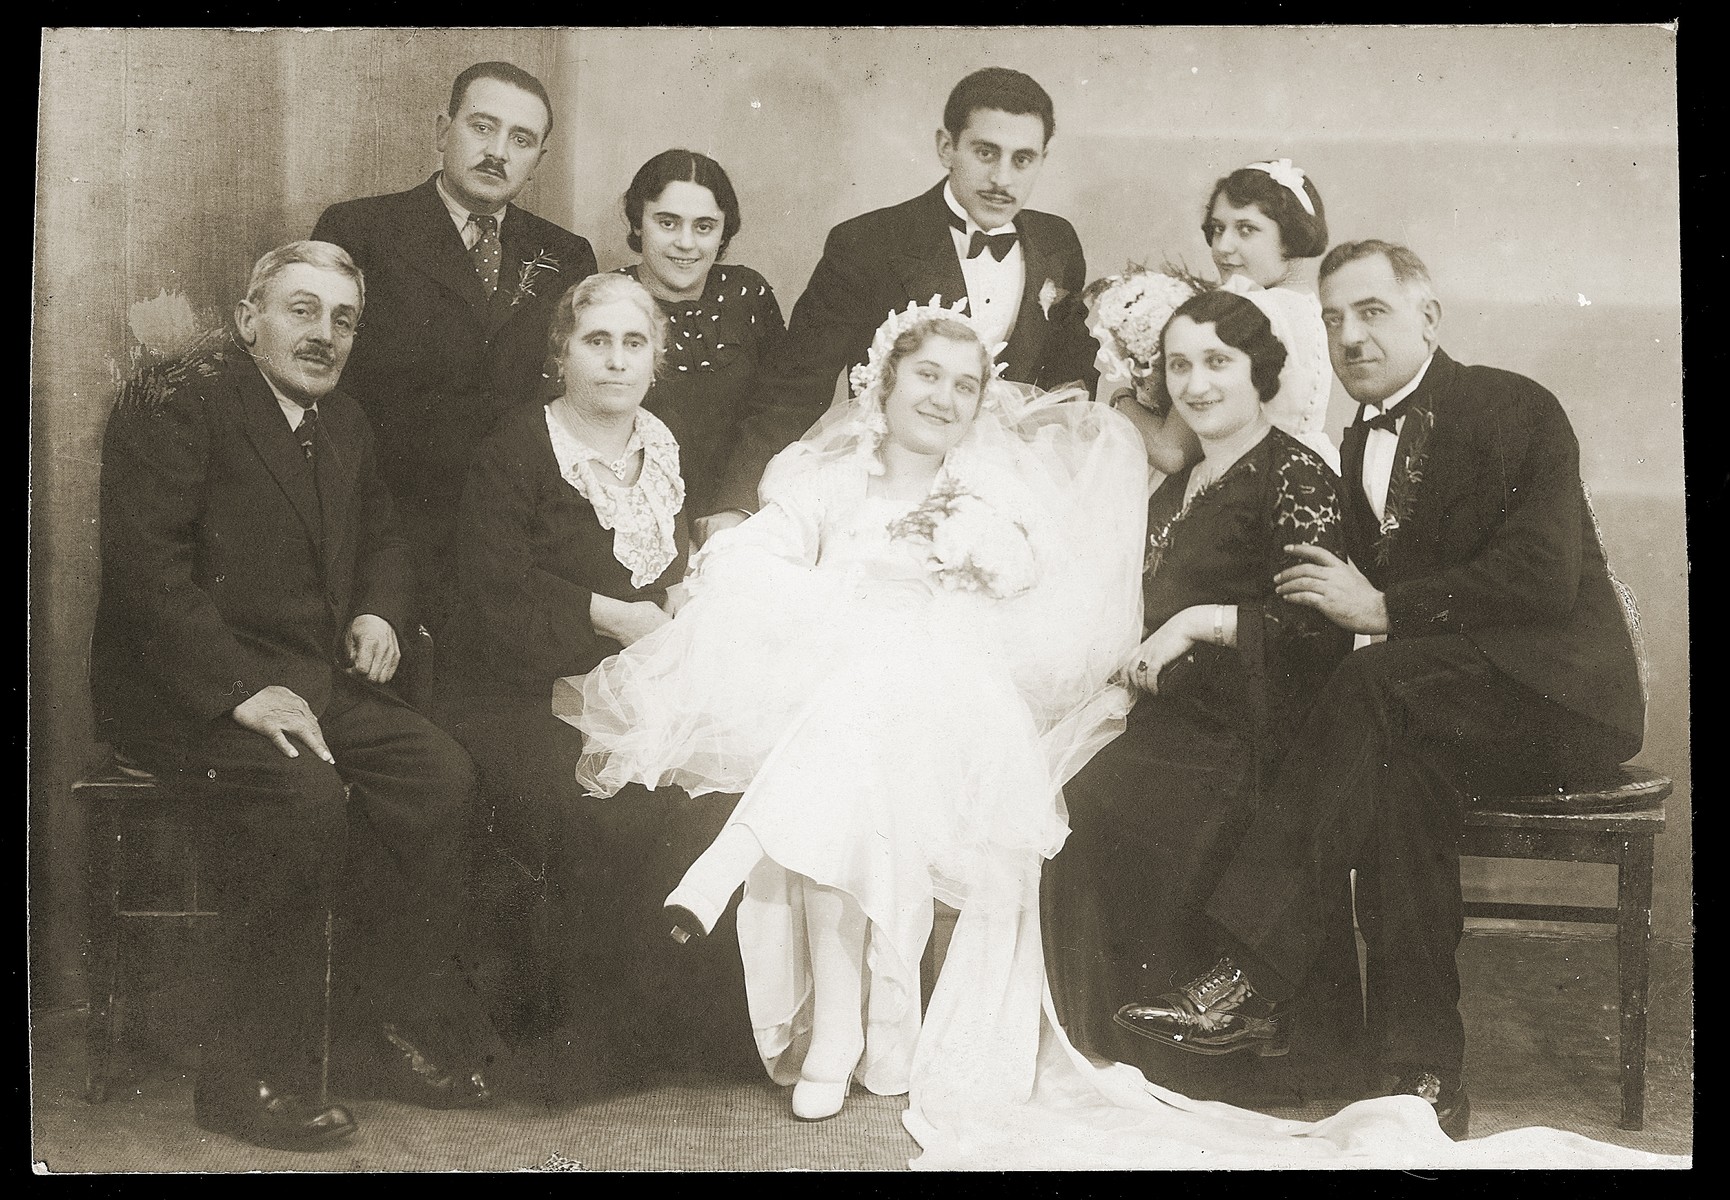 Group portrait of family members at the wedding of Mosa (Moshe) Mandil and Gabriela (Ela) Konfino in Belgrade.  

Pictured are Mosa Mandil and Gabriela Konfino, the groom and bride, David and Regina Mandil, the groom's parents (seated on the left); Gavra and Elisabeth Konfino, the bride's parents (seated on the right); Streja Mandil, the groom's sister, and her husband (standing on the left); and Gizela Konfino, the bride's sister (standing on the right).